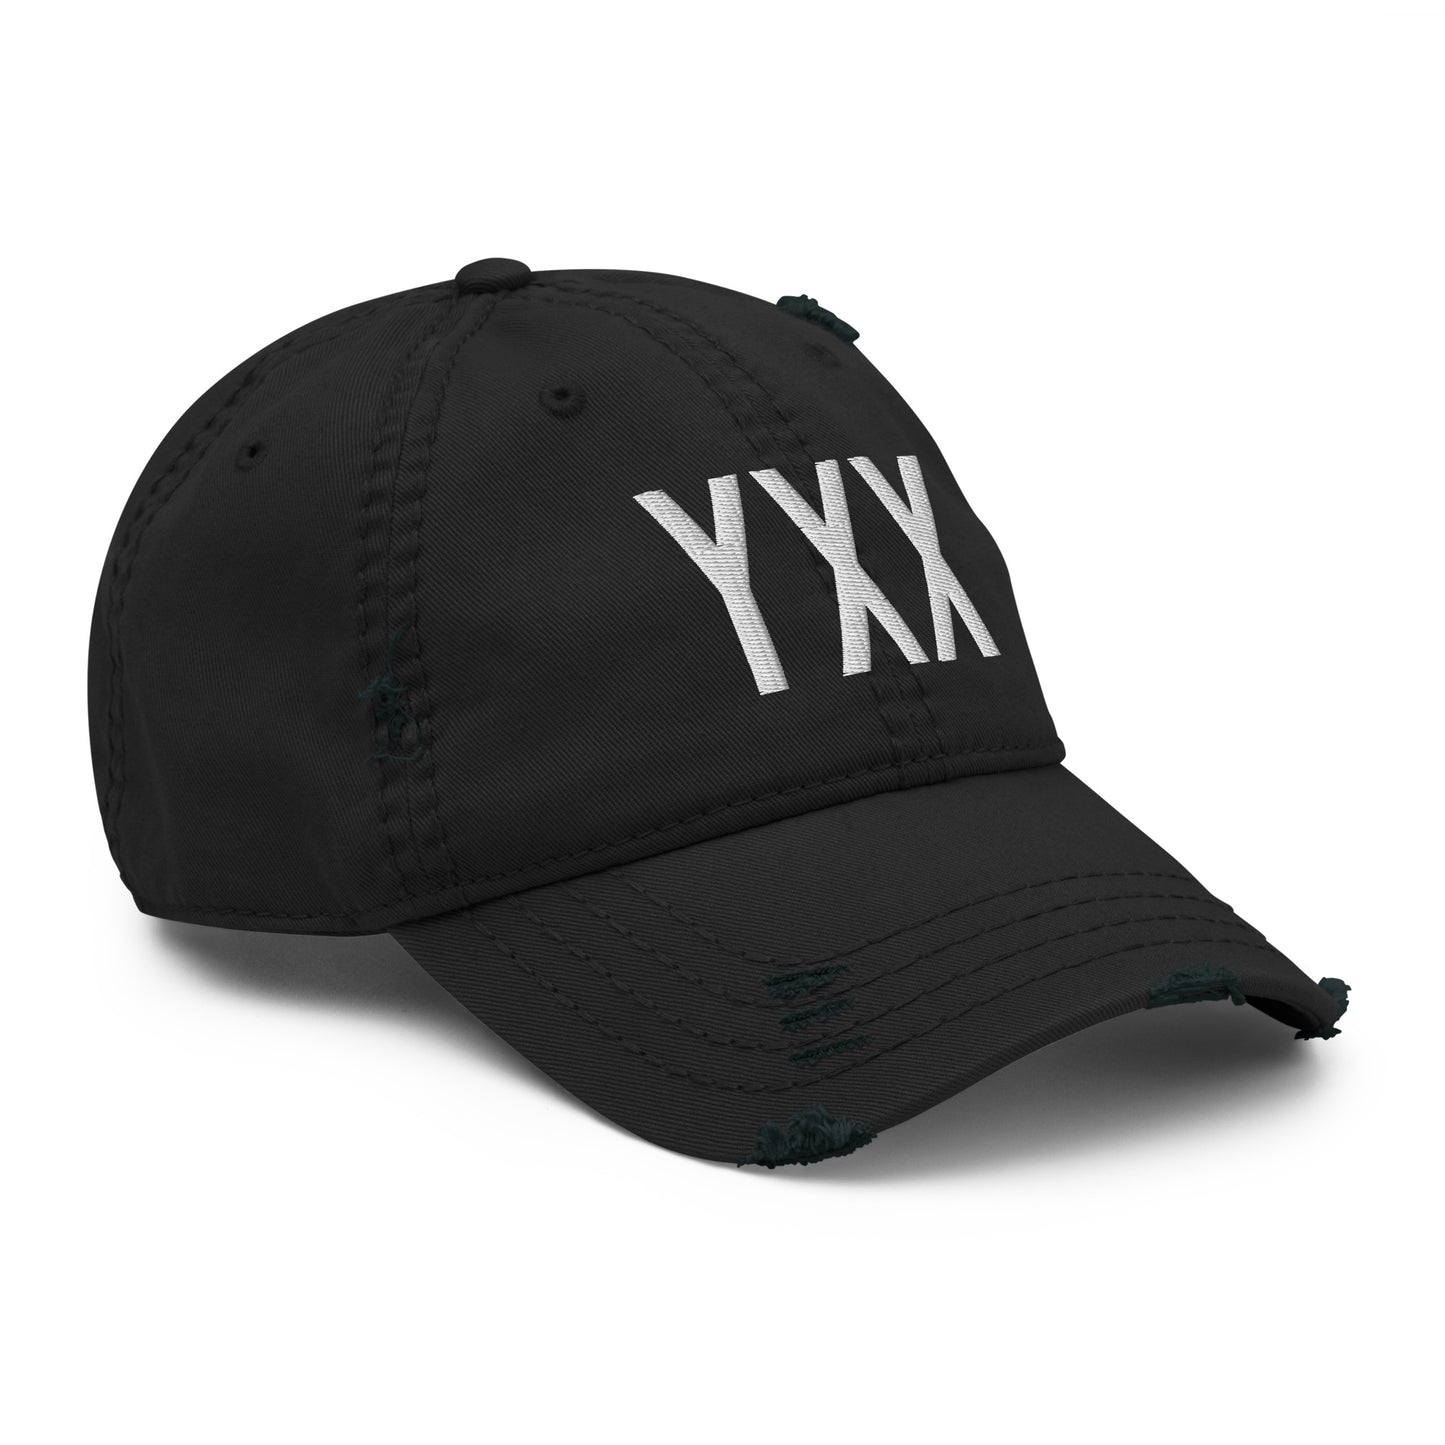 Airport Code Distressed Hat - White • YXX Abbotsford • YHM Designs - Image 12